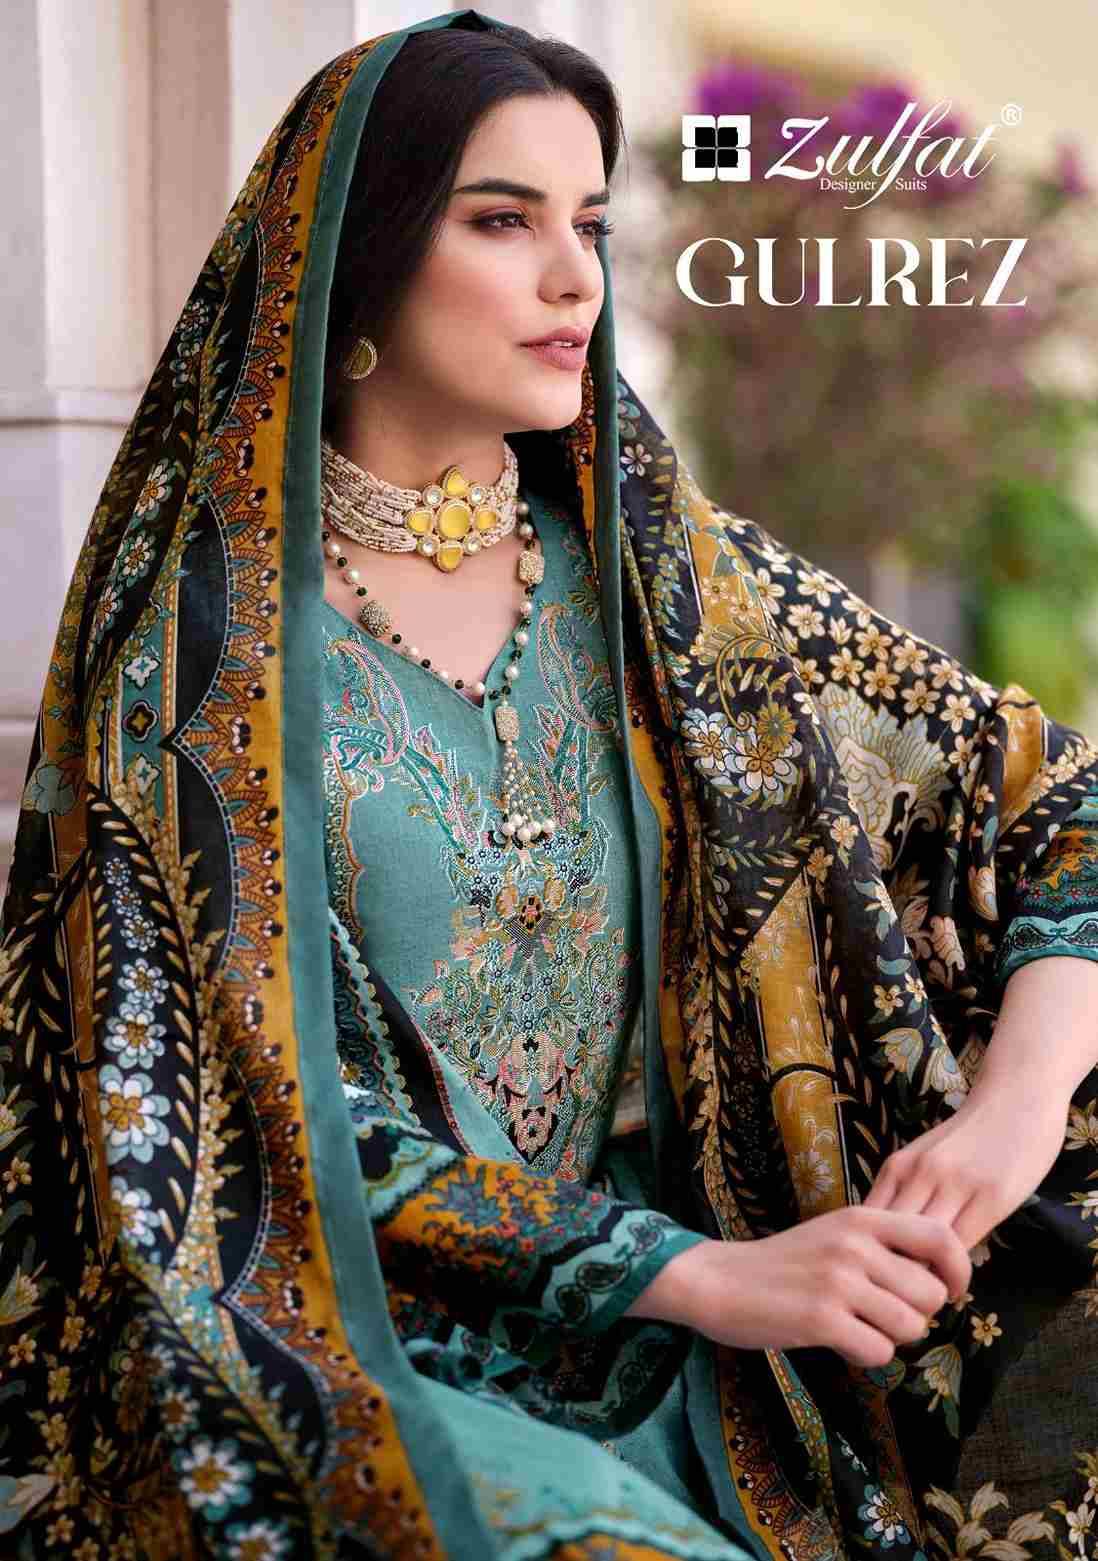 Gulrez By Zulfat 534-001 To 534-008 Series Beautiful Festive Suits Stylish Fancy Colorful Casual Wear & Ethnic Wear Pure Cotton Print Dresses At Wholesale Price